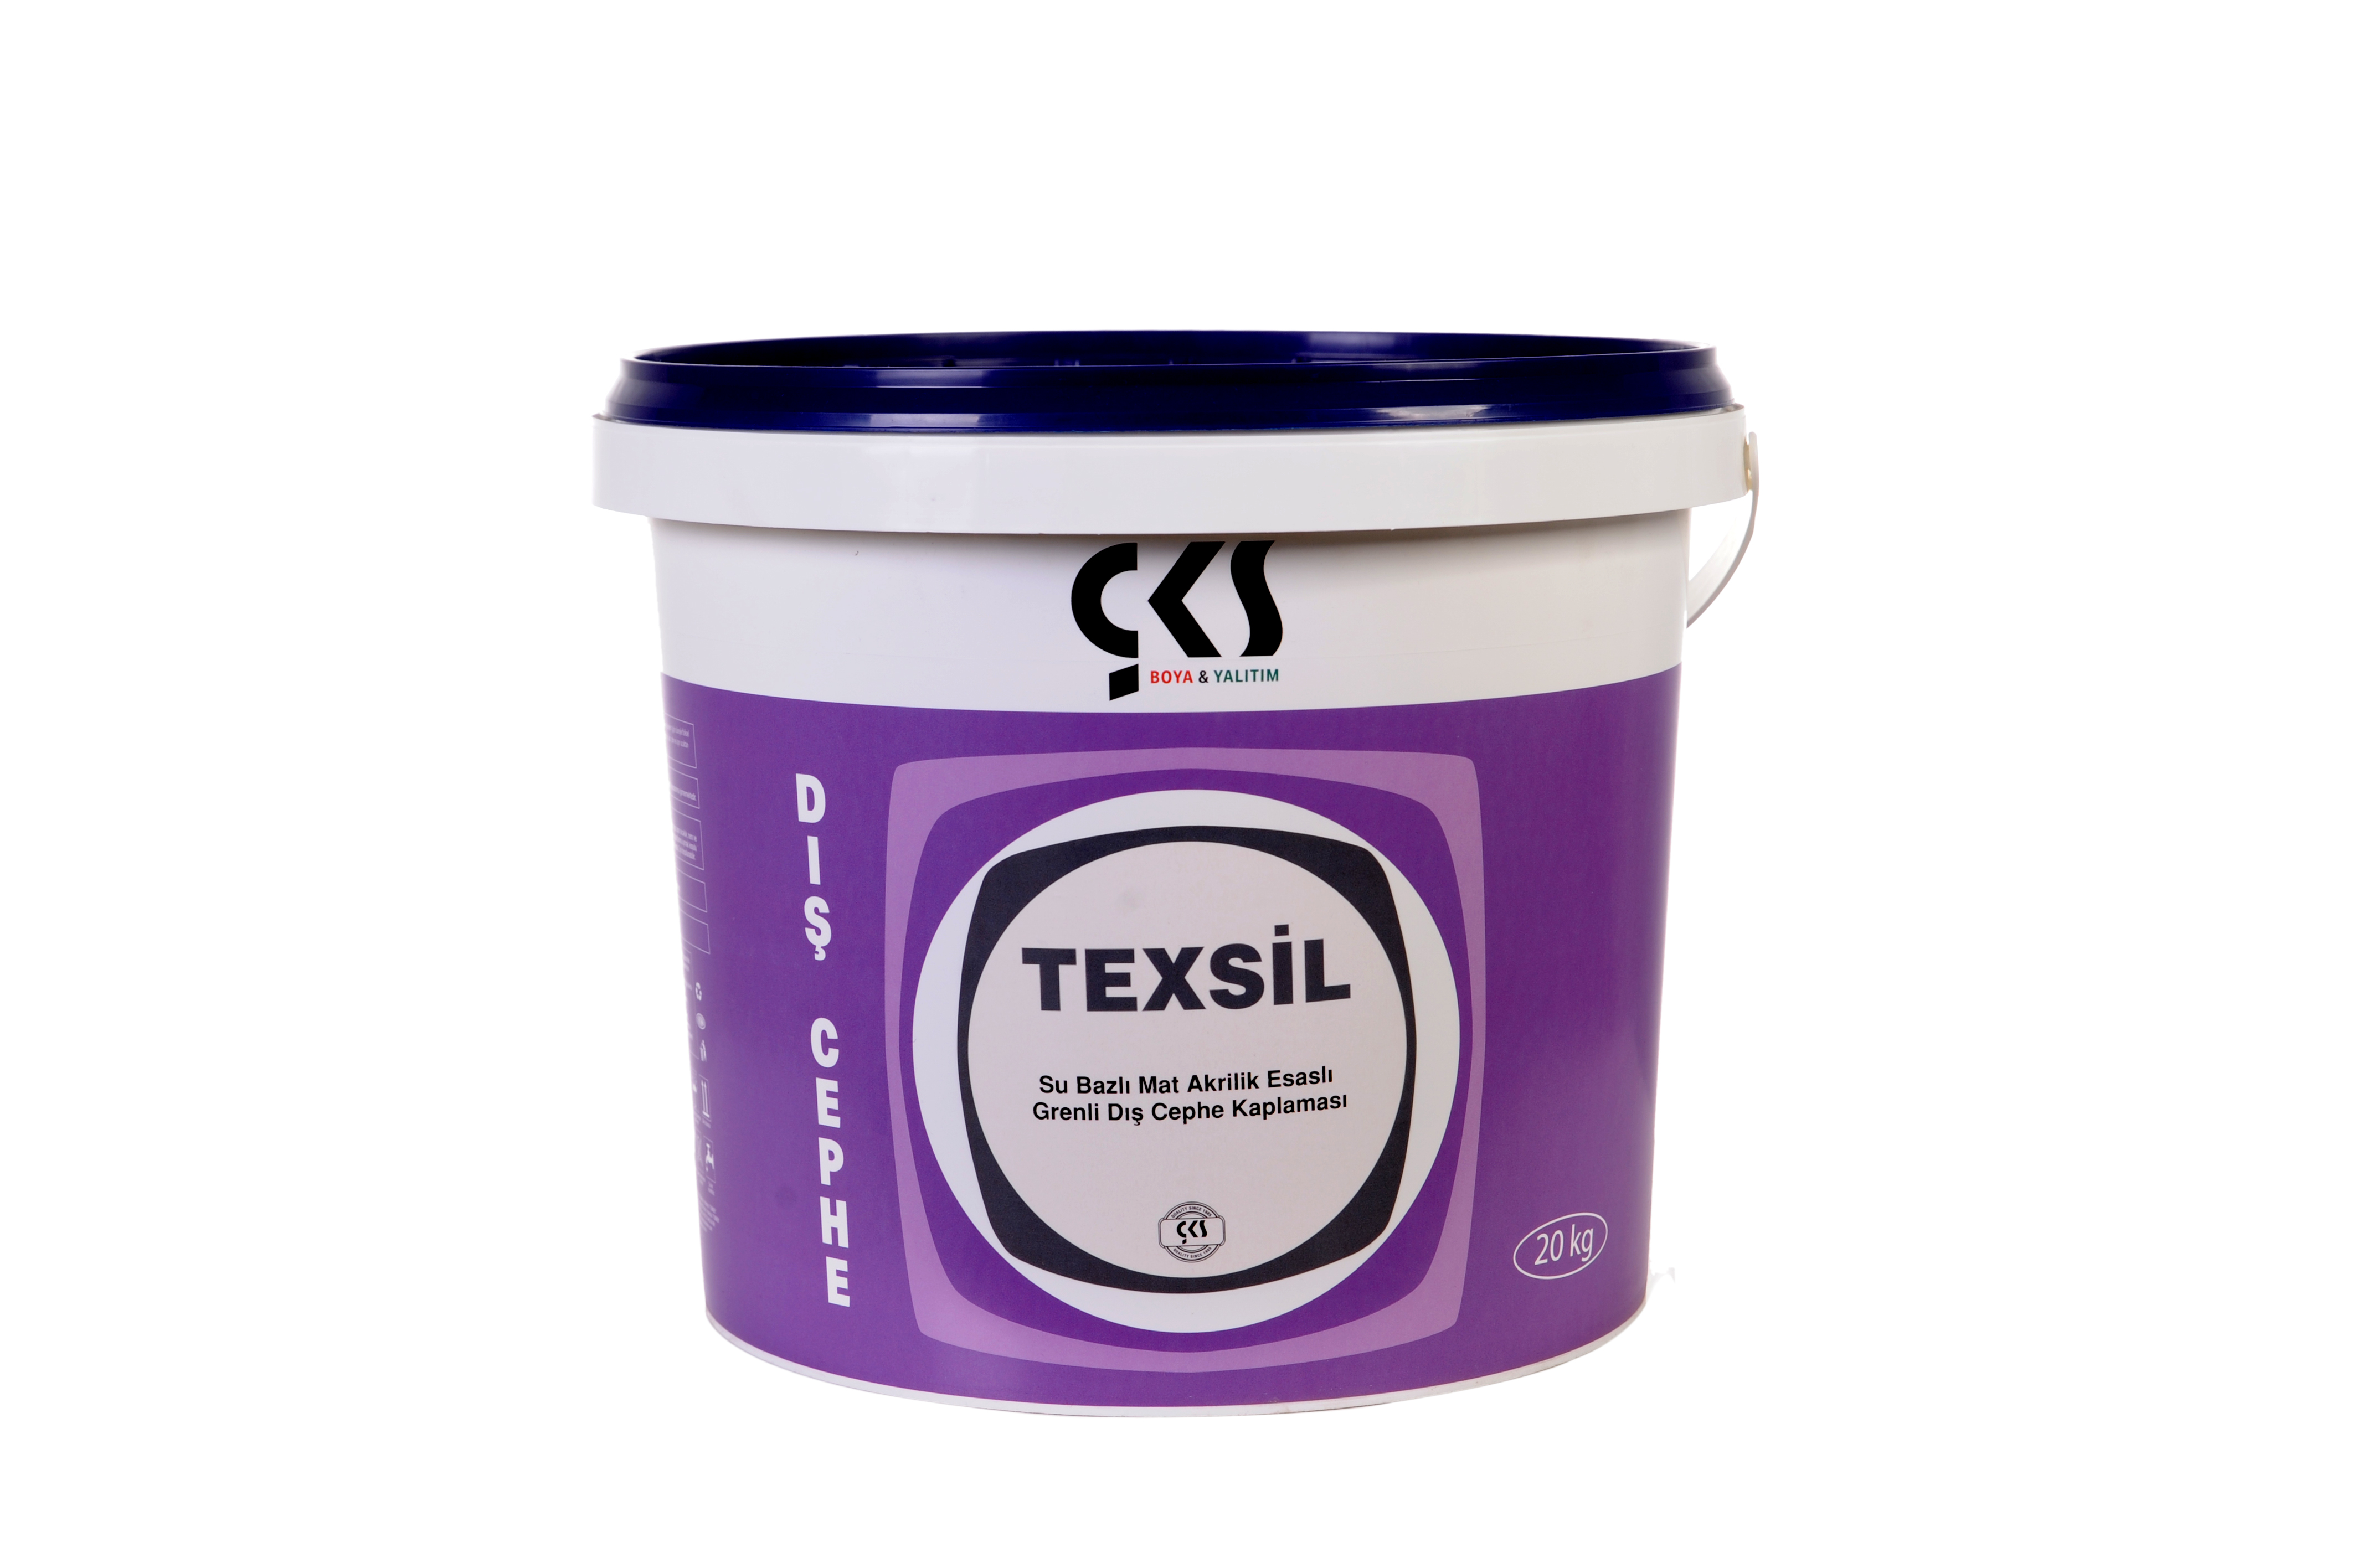 ÇKS TEXSIL WATER BASED MAT ACRYLIC SILICONE PAINT